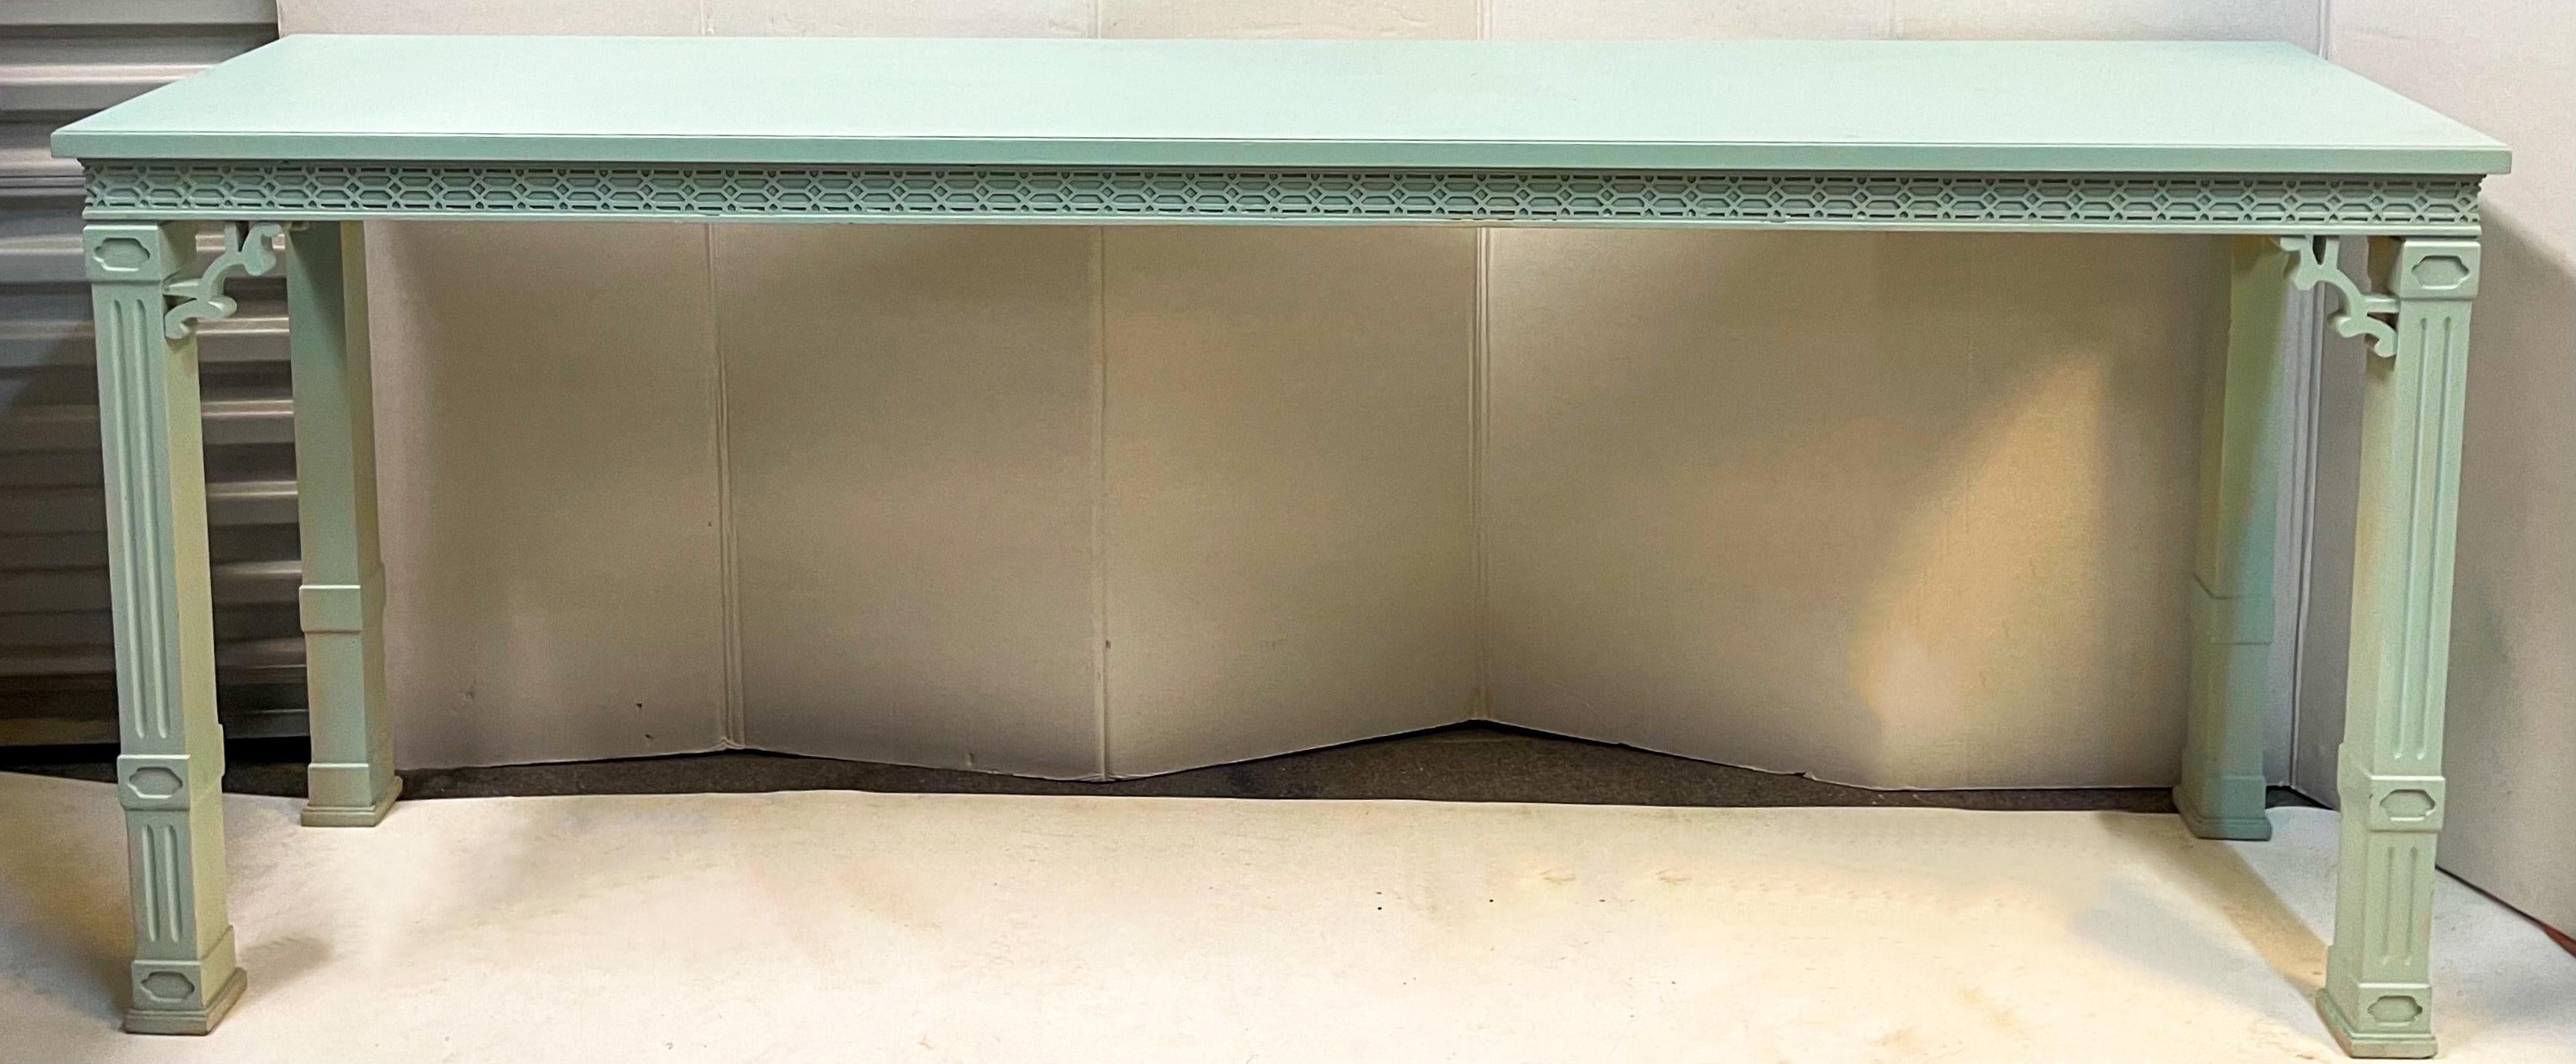 This is a robin’s egg blue painted Chinese chippendale style console table by Erwin Lambeth. There are two for someone looking for a pair. The paint is a more recent addition. They date to the 1970s. Note: photos are showing some light reflecting